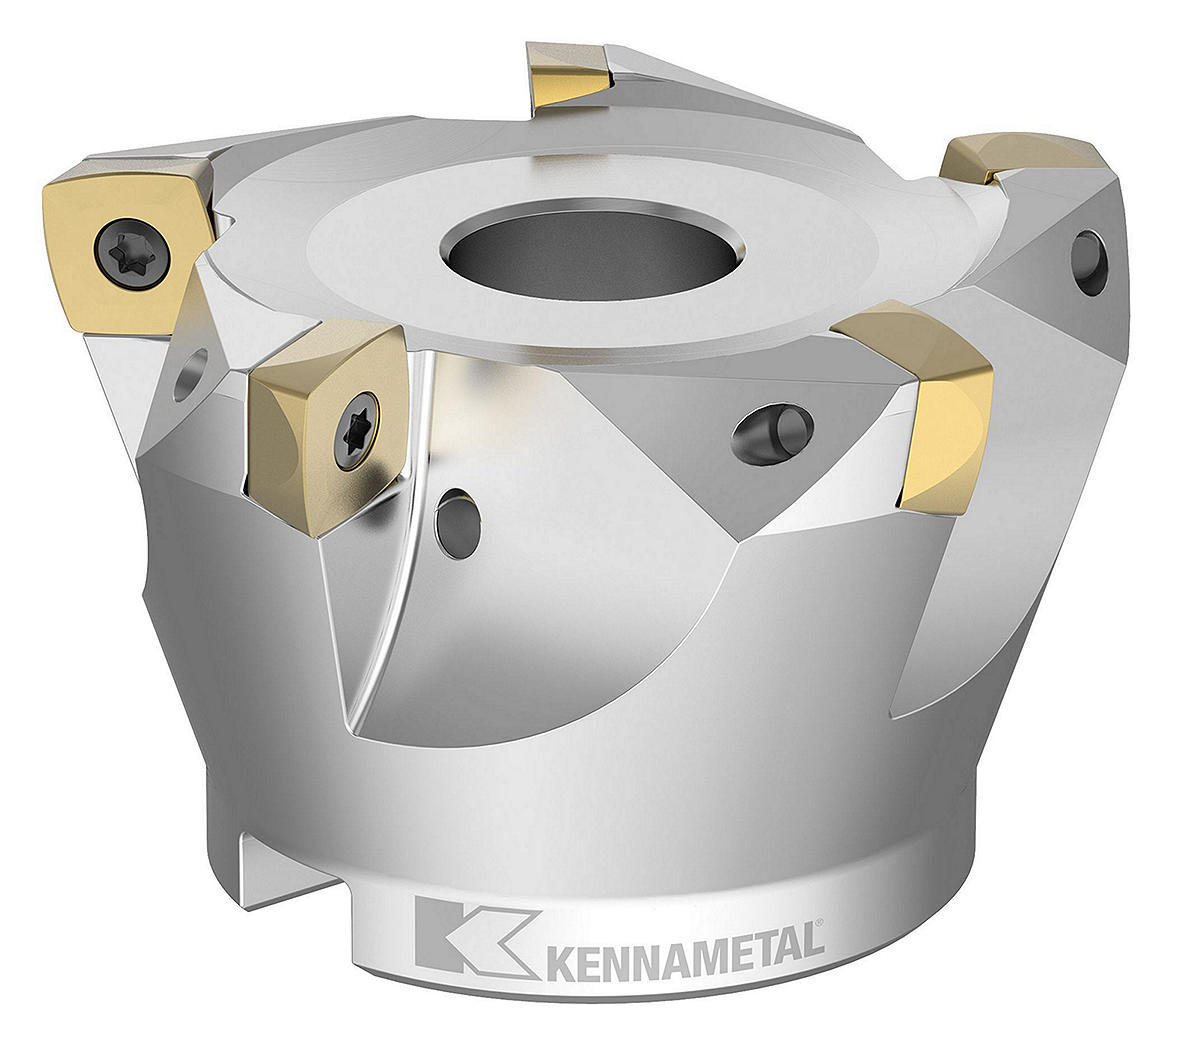 High-Feed copy milling cutter for multiple materials.